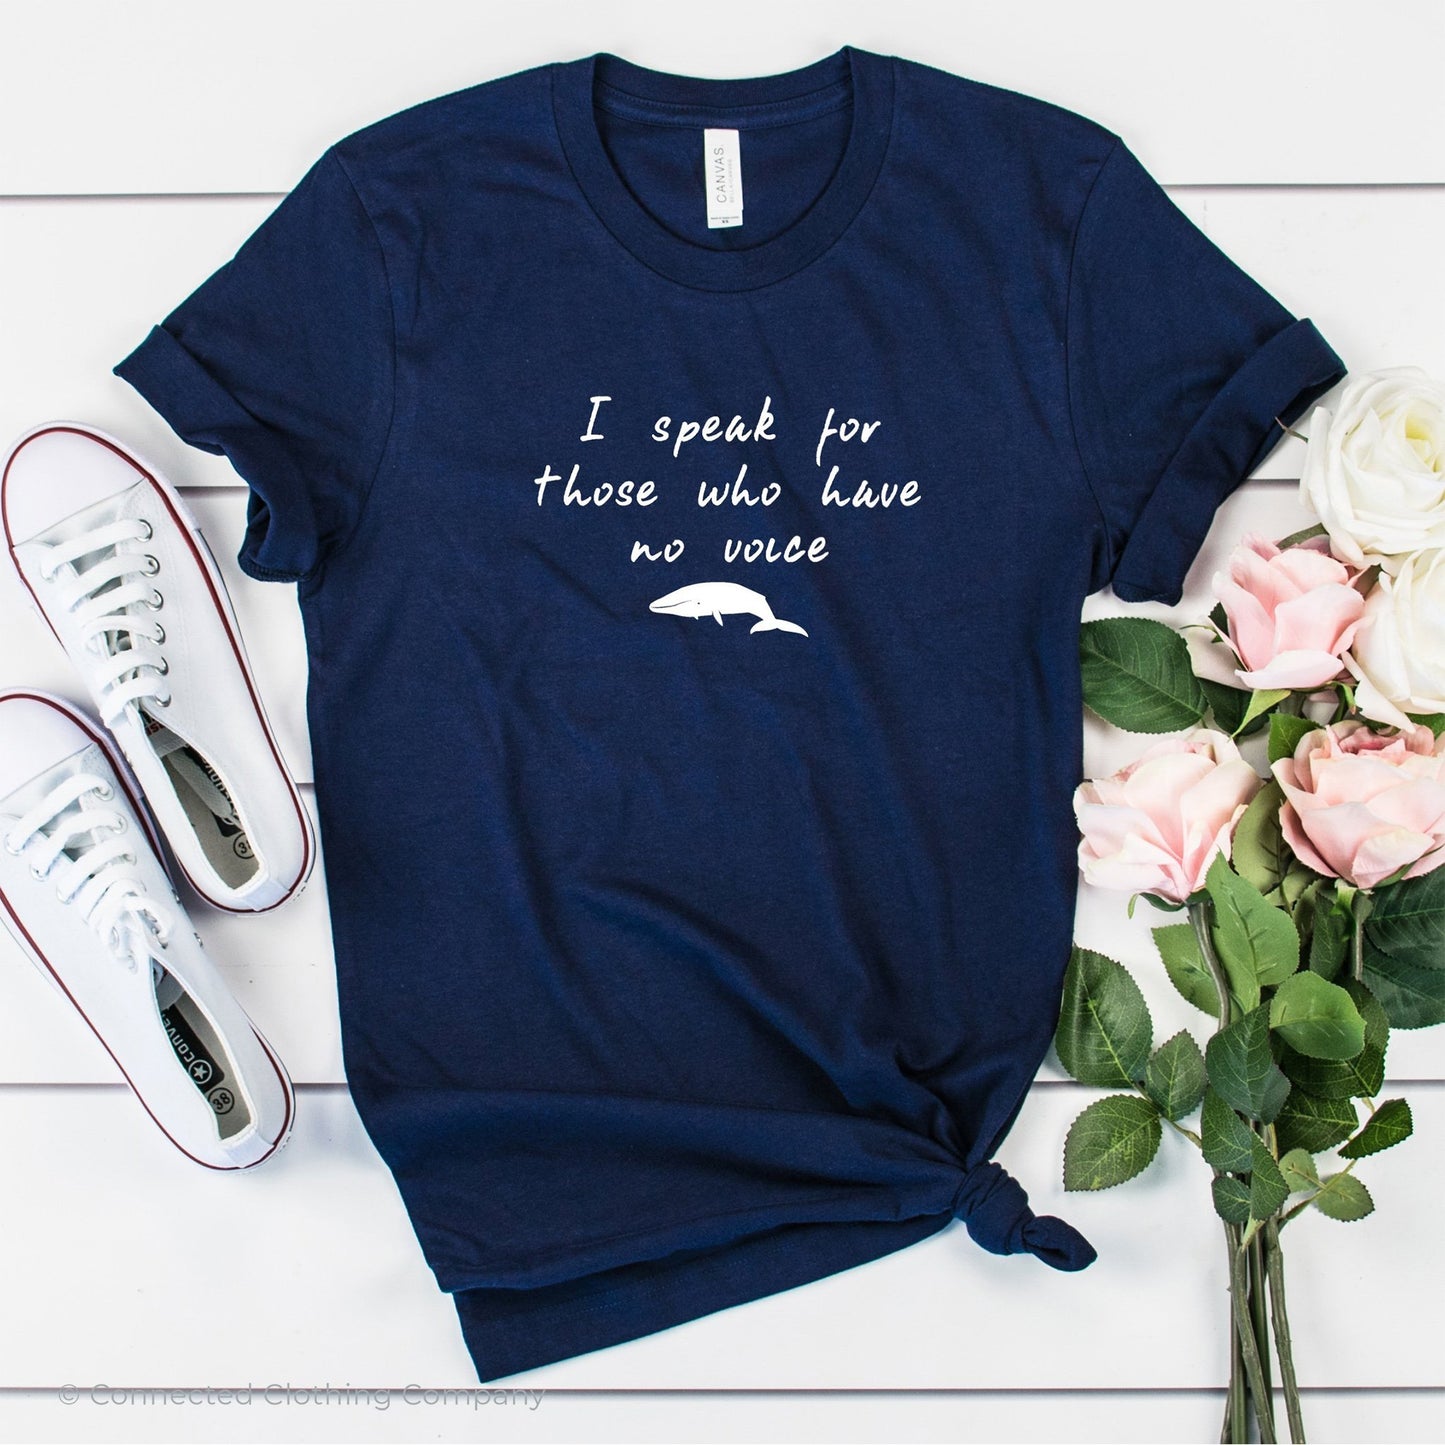 Be The Voice Whale Unisex Short-Sleeve Tee in Navy - sweetsherriloudesigns donates 10% of the profits from this t-shirt to Mission Blue ocean conservation